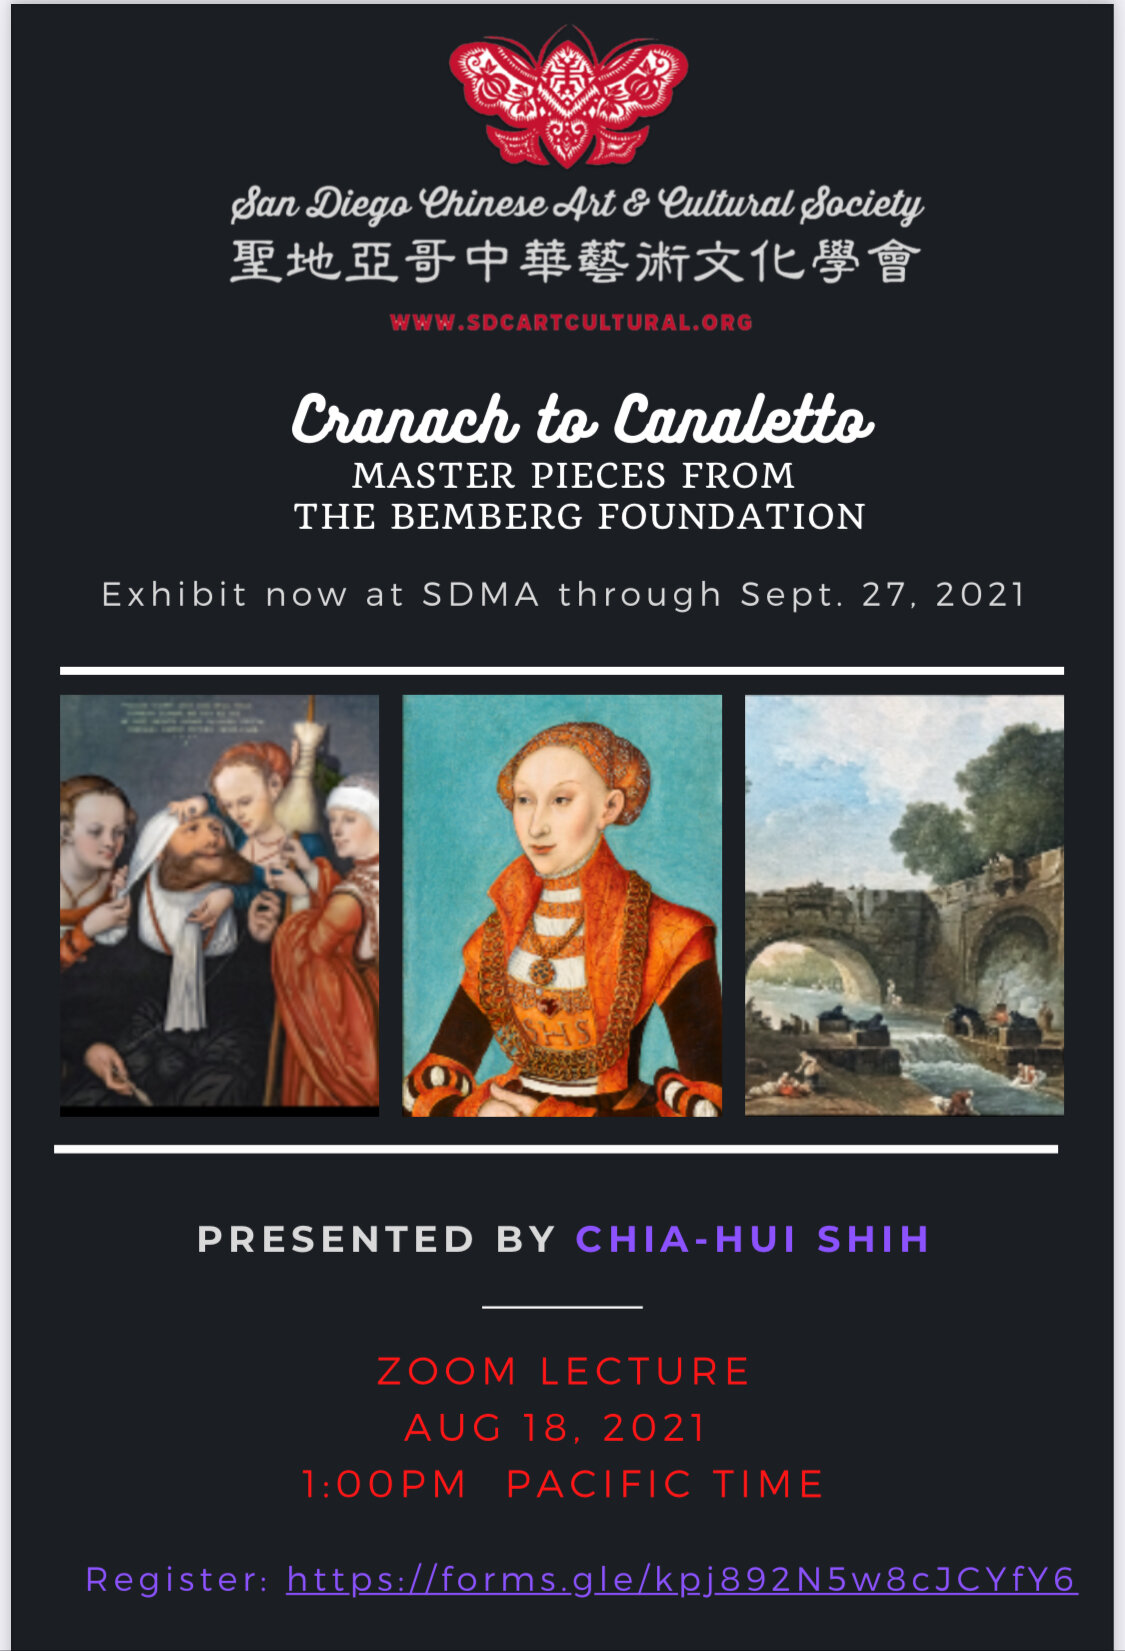 Cranach to Cannletto Zoom Lecture Flyer.jpg